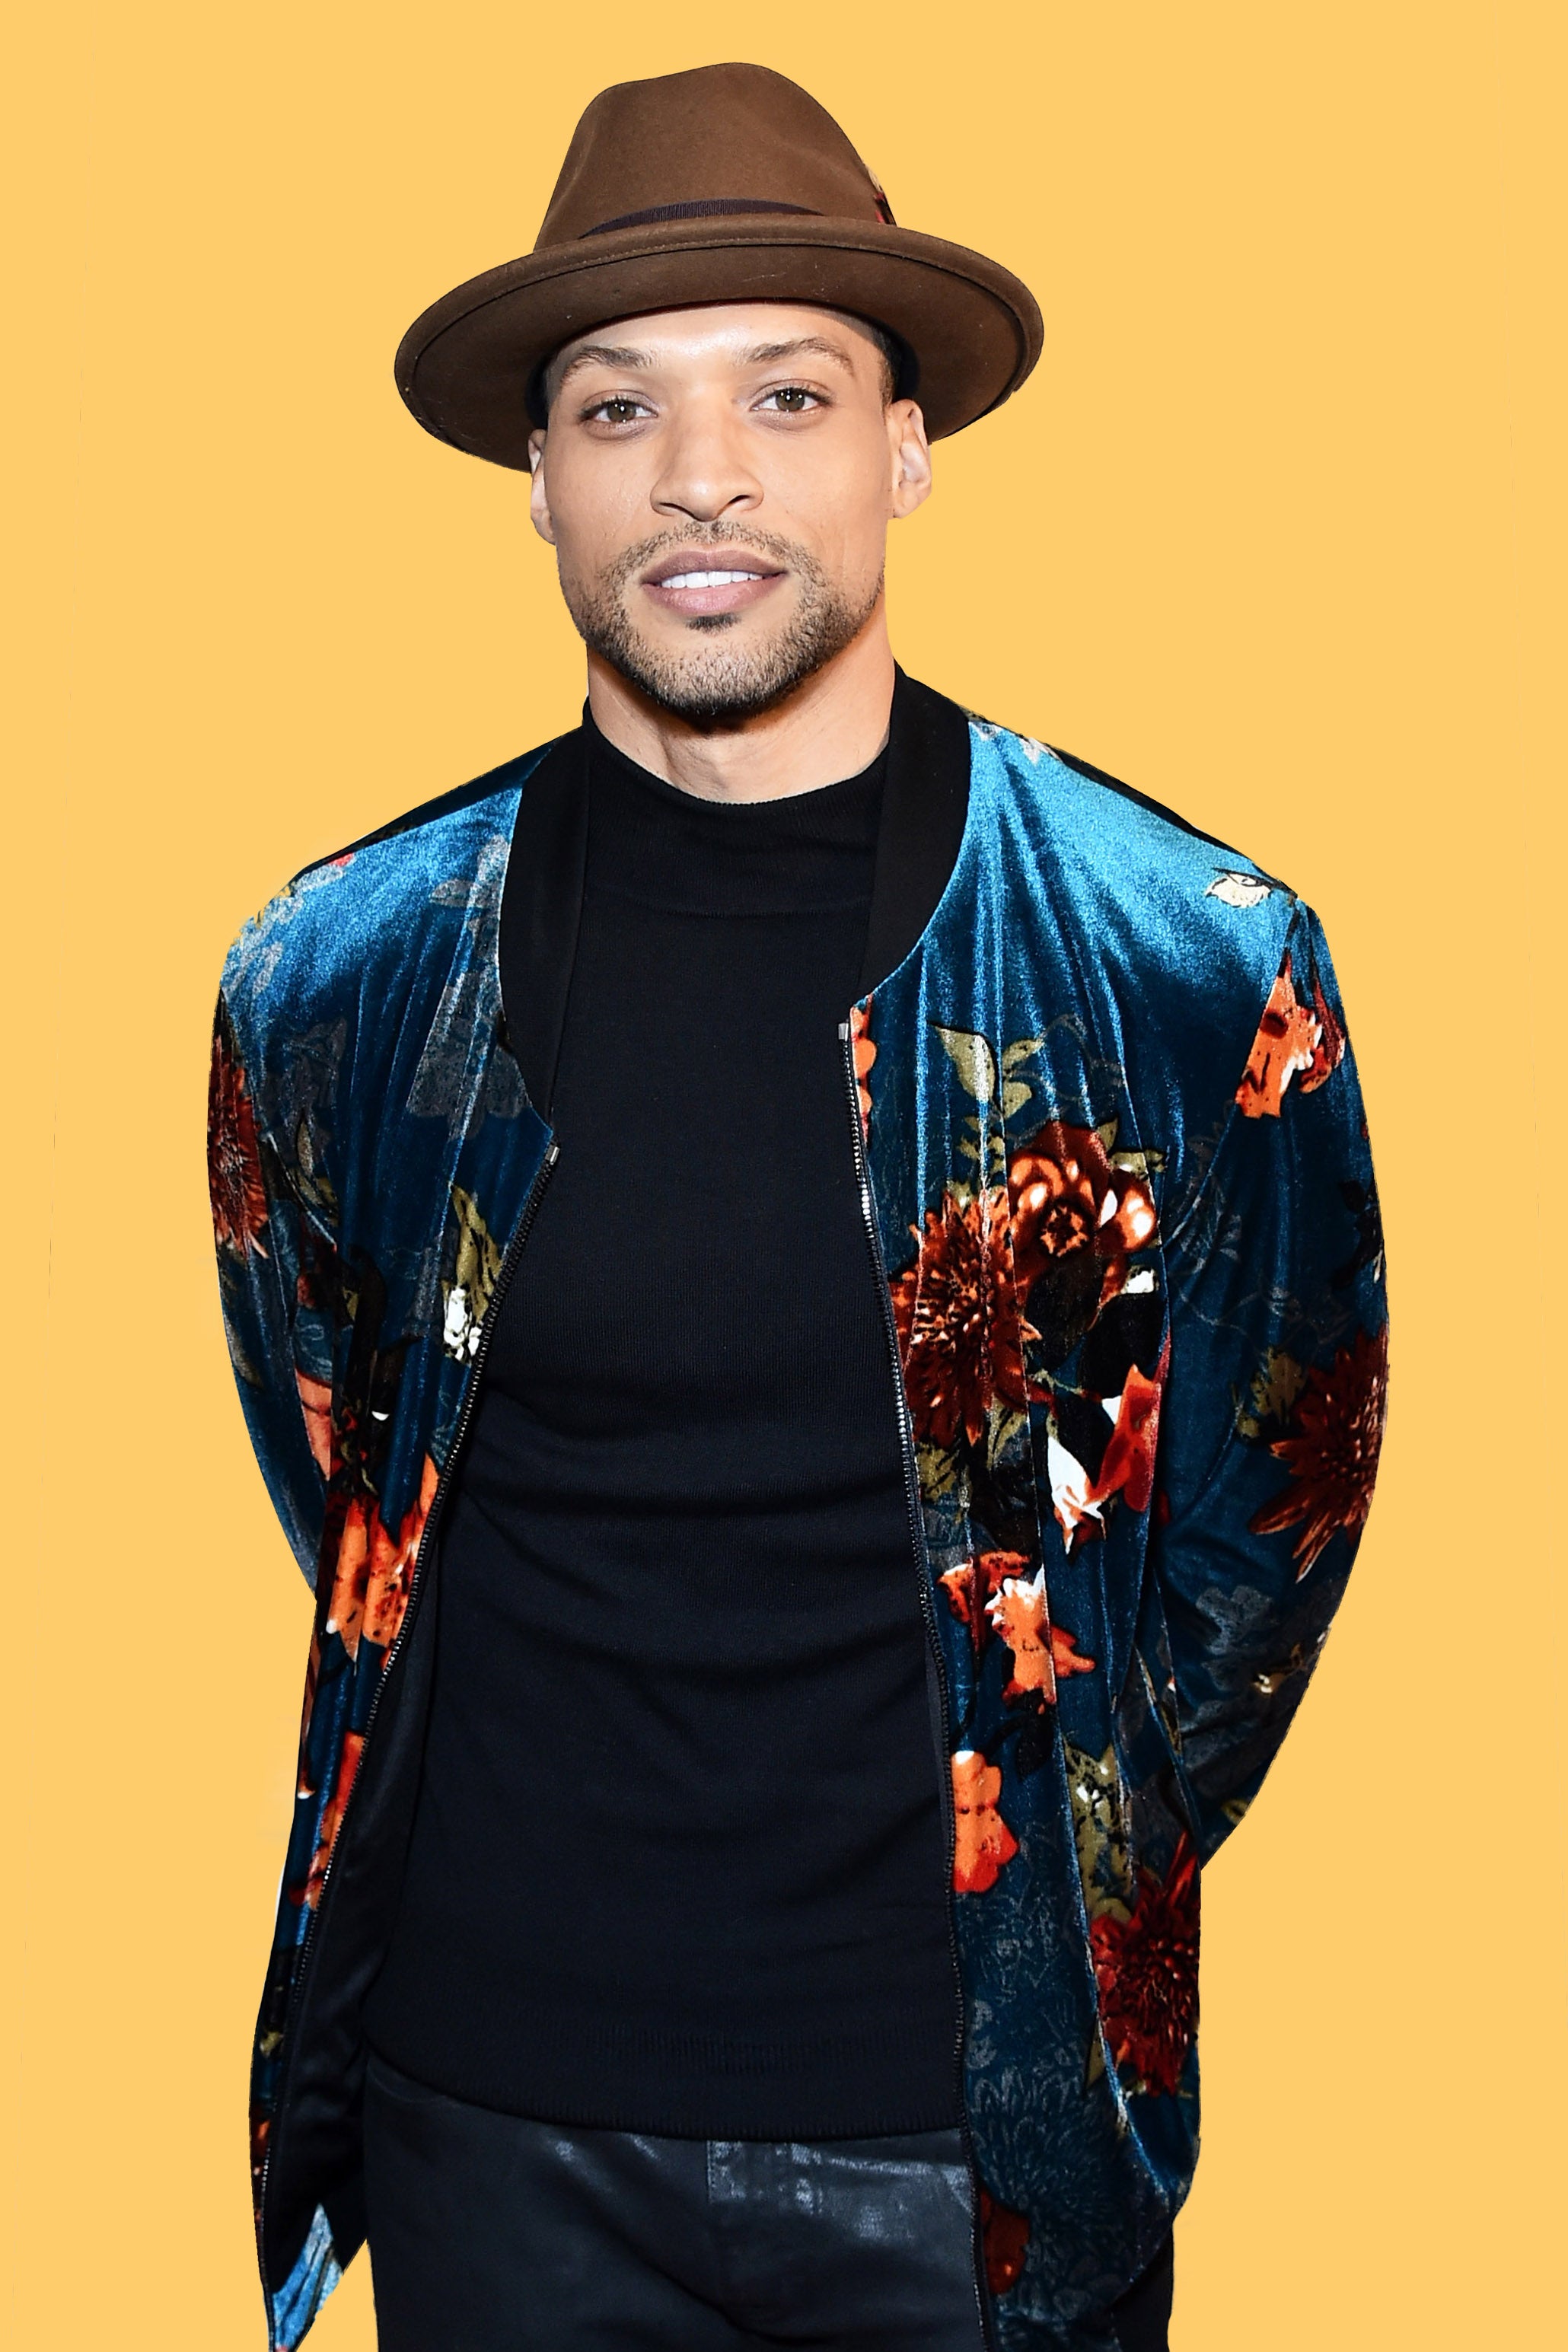 Five Things To Know About 'She's Gotta Have It' Actor Cleo Anthony
